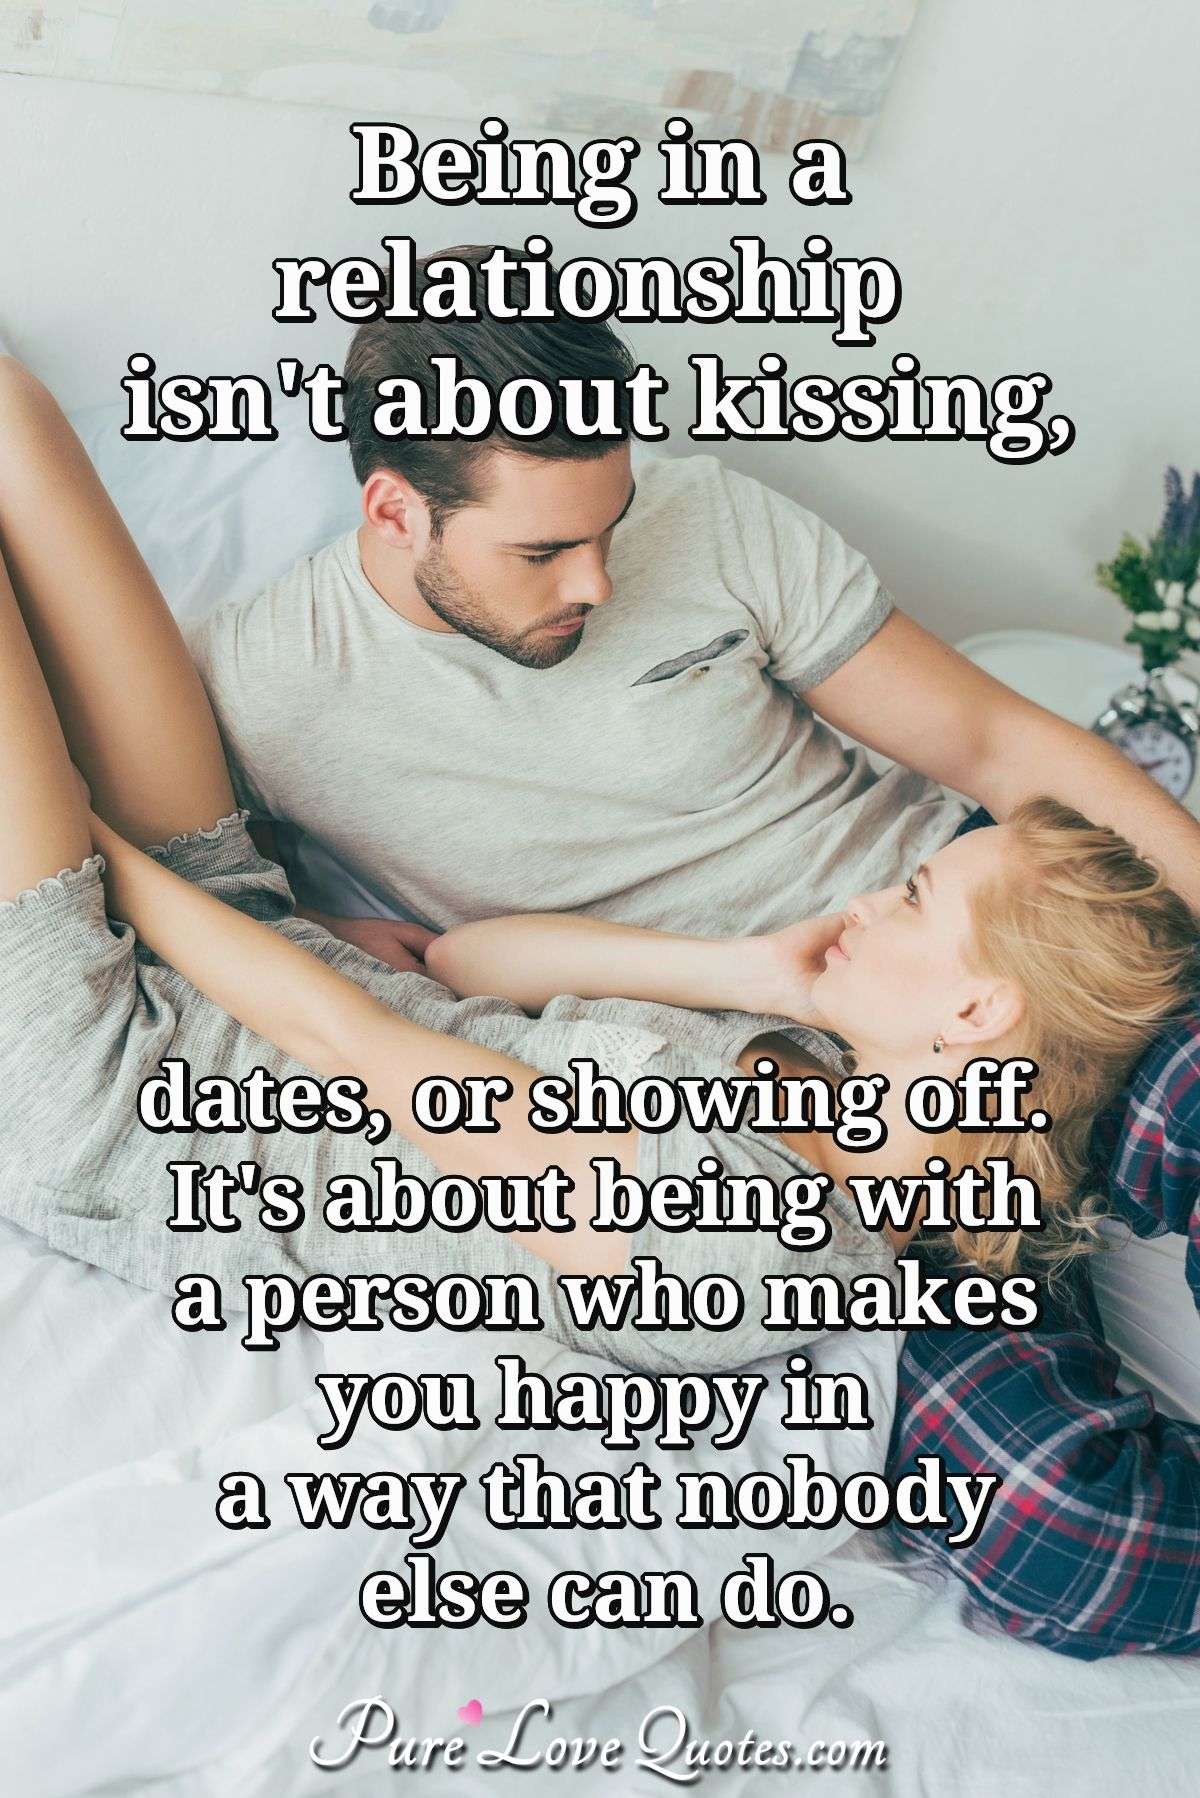 Being in a relationship isn't about kissing, dates, or showing off. It's about being with a person who makes you happy in a way that nobody else can do. - Anonymous